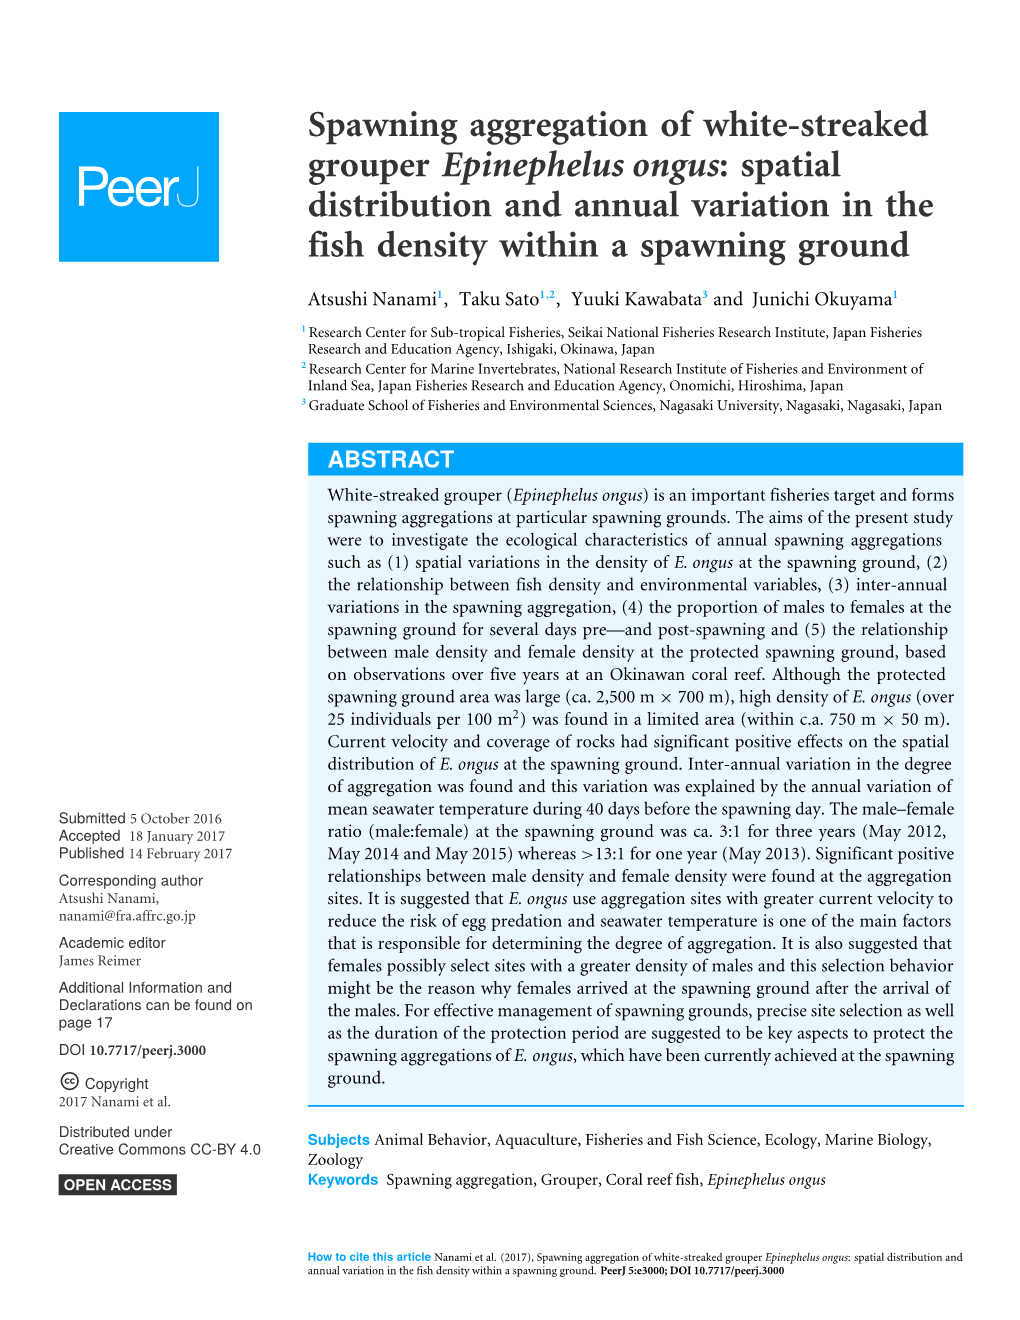 Spawning Aggregation of White-Streaked Grouper Epinephelus Ongus: Spatial Distribution and Annual Variation in the Fish Density Within a Spawning Ground